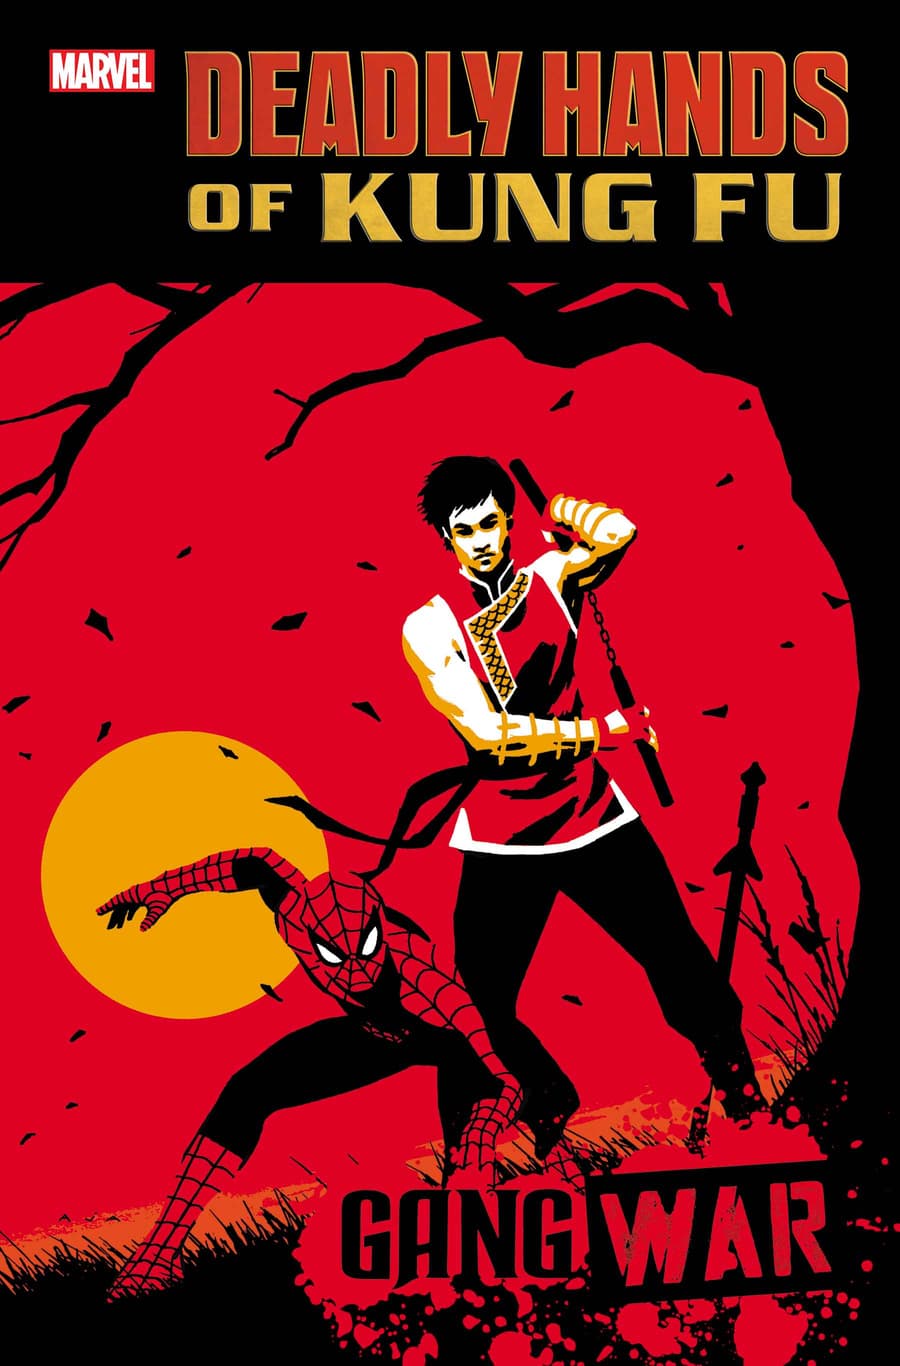 DEADLY HANDS OF KUNG FU: GANG WAR #1 cover by David Aja